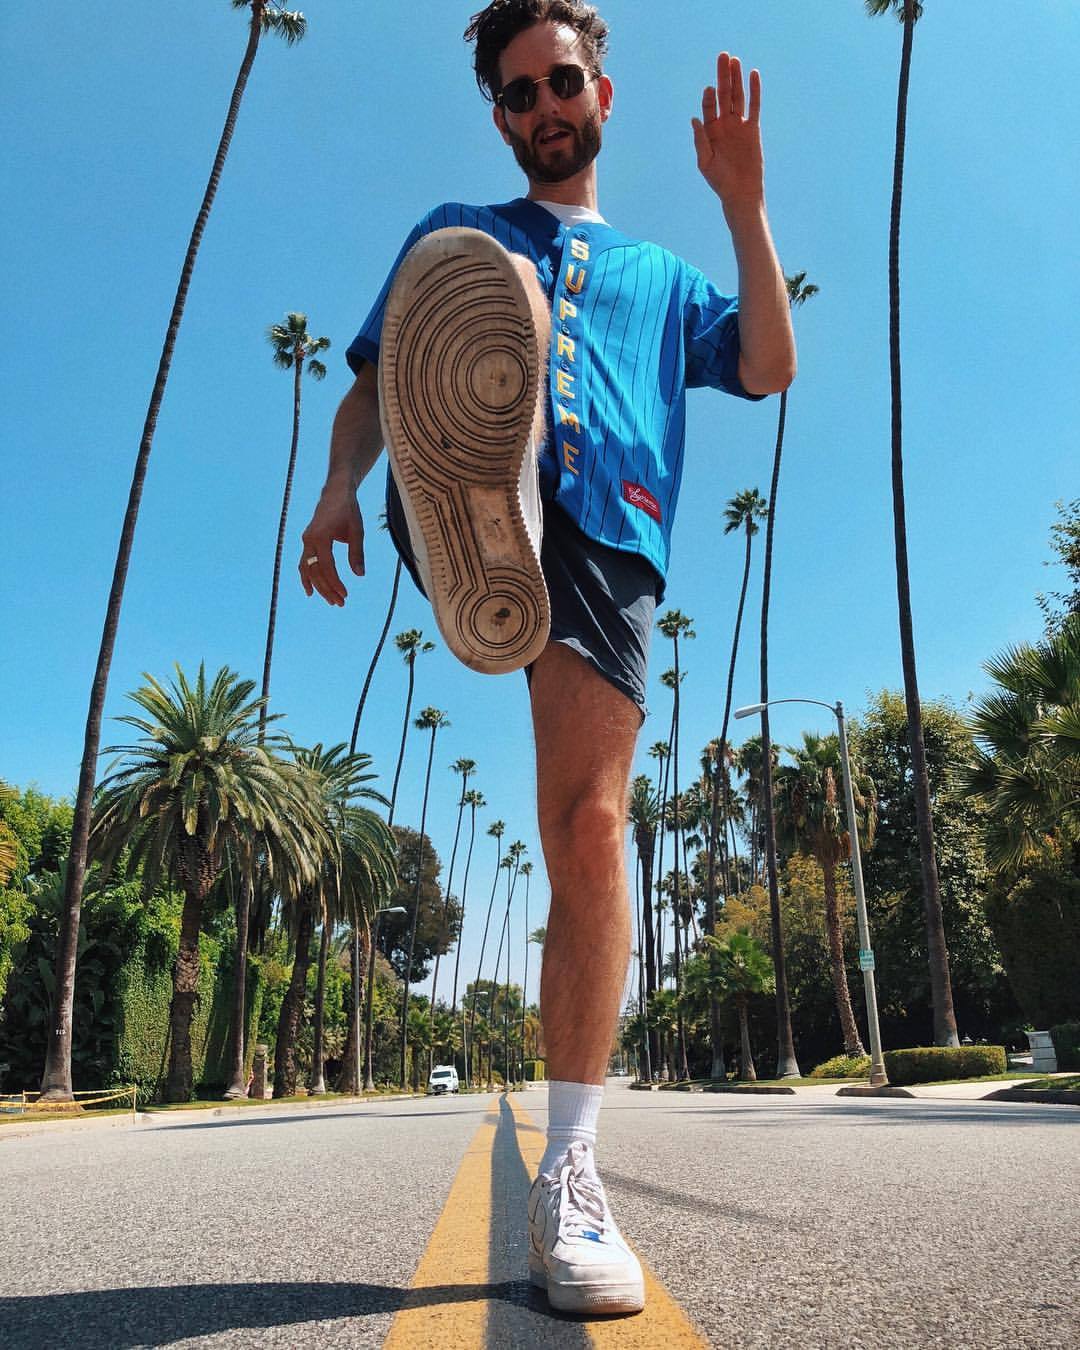 All you people can’t you see can’t you see 📷 @jyrgn (at Beverly Hills, California) https://www.instagram.com/p/BnRTczdD_KX/?utm_source=ig_tumblr_share&igshid=g85mox6ns14z